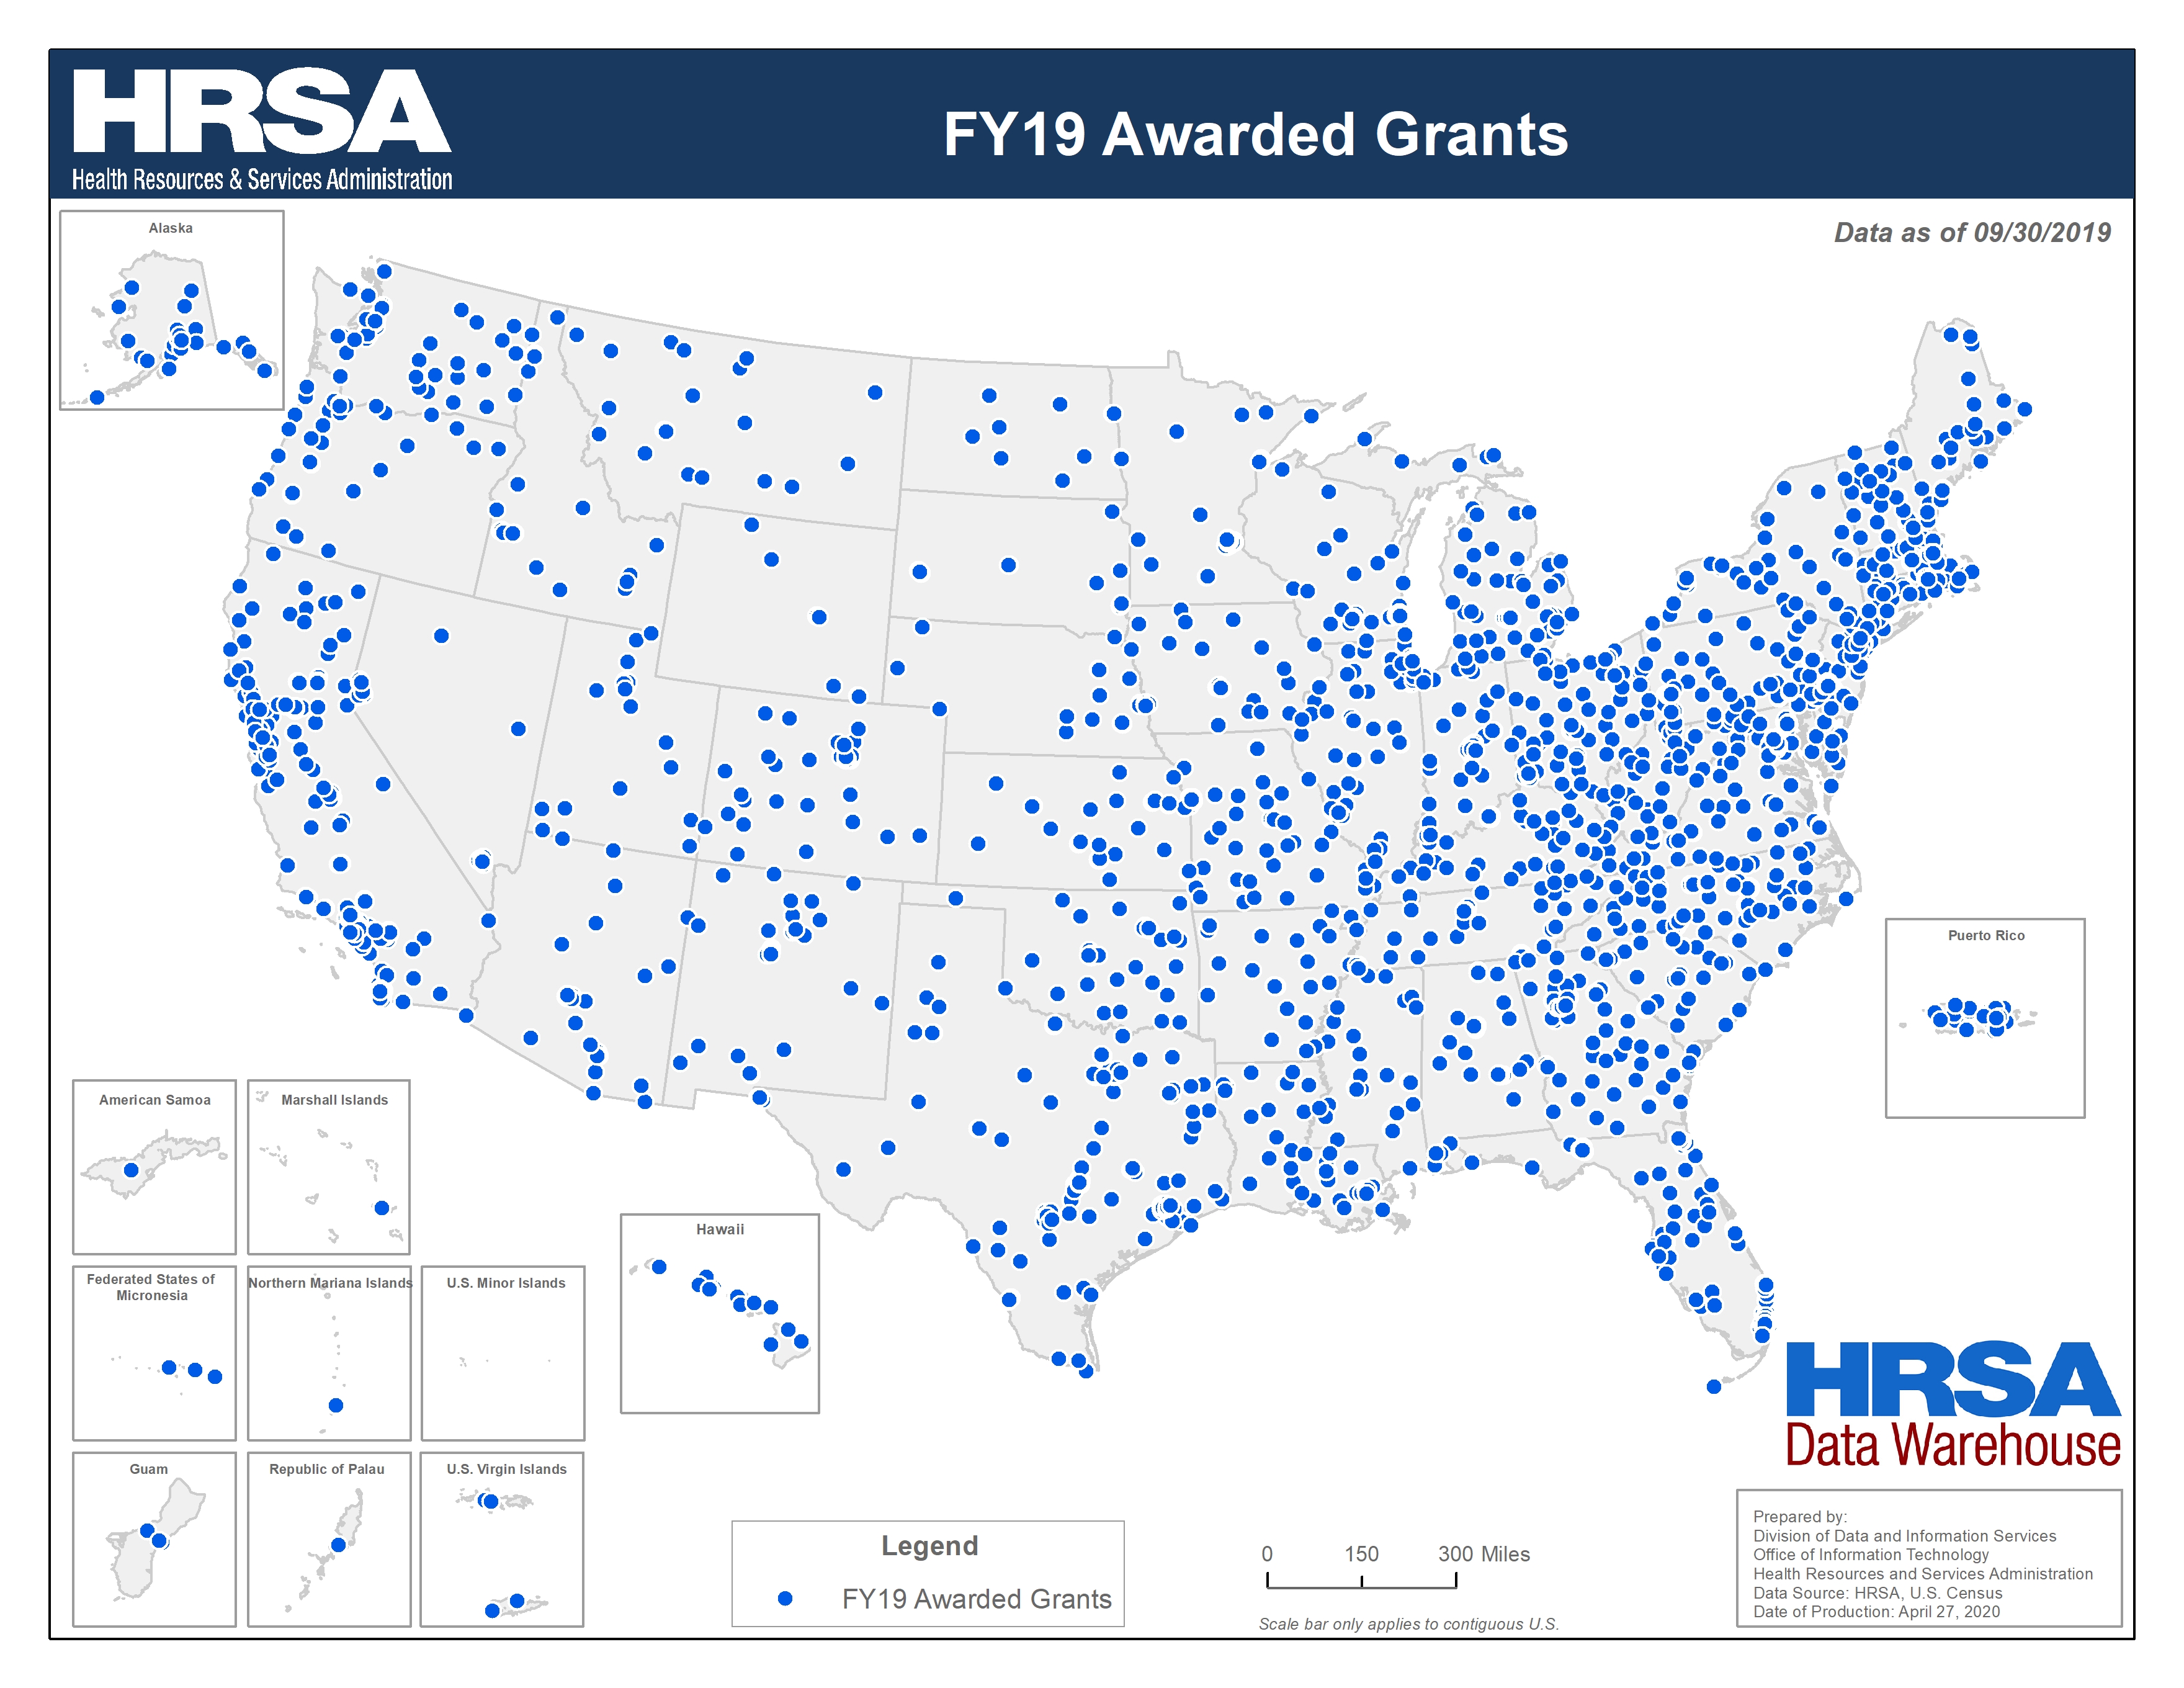 Preview Map of FY19 Awarded Grants